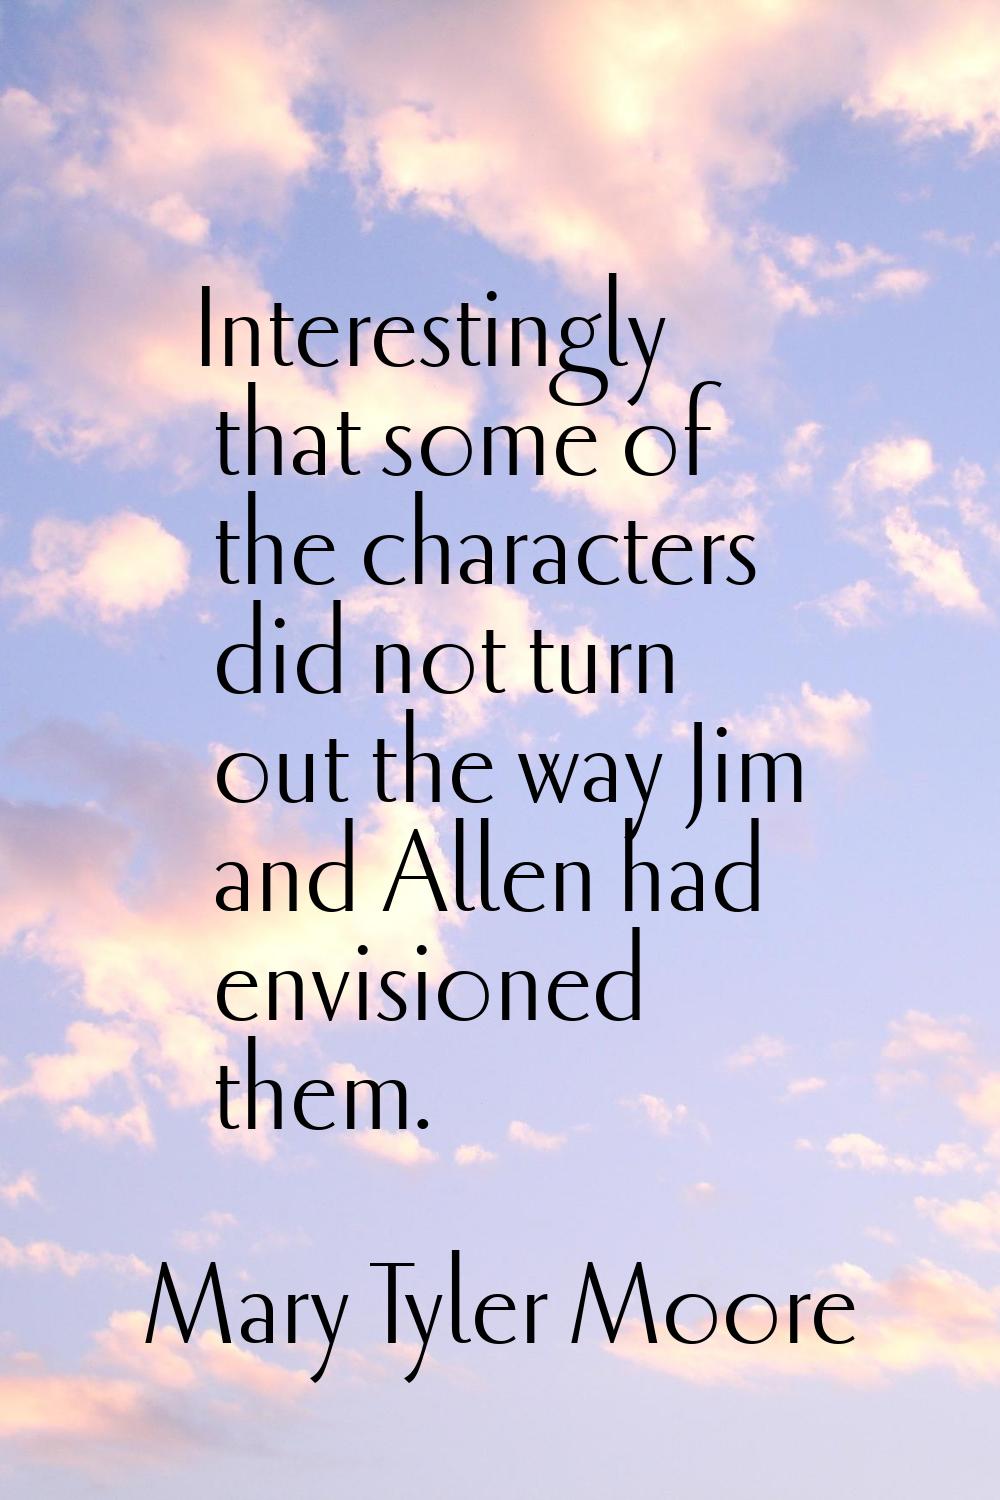 Interestingly that some of the characters did not turn out the way Jim and Allen had envisioned the